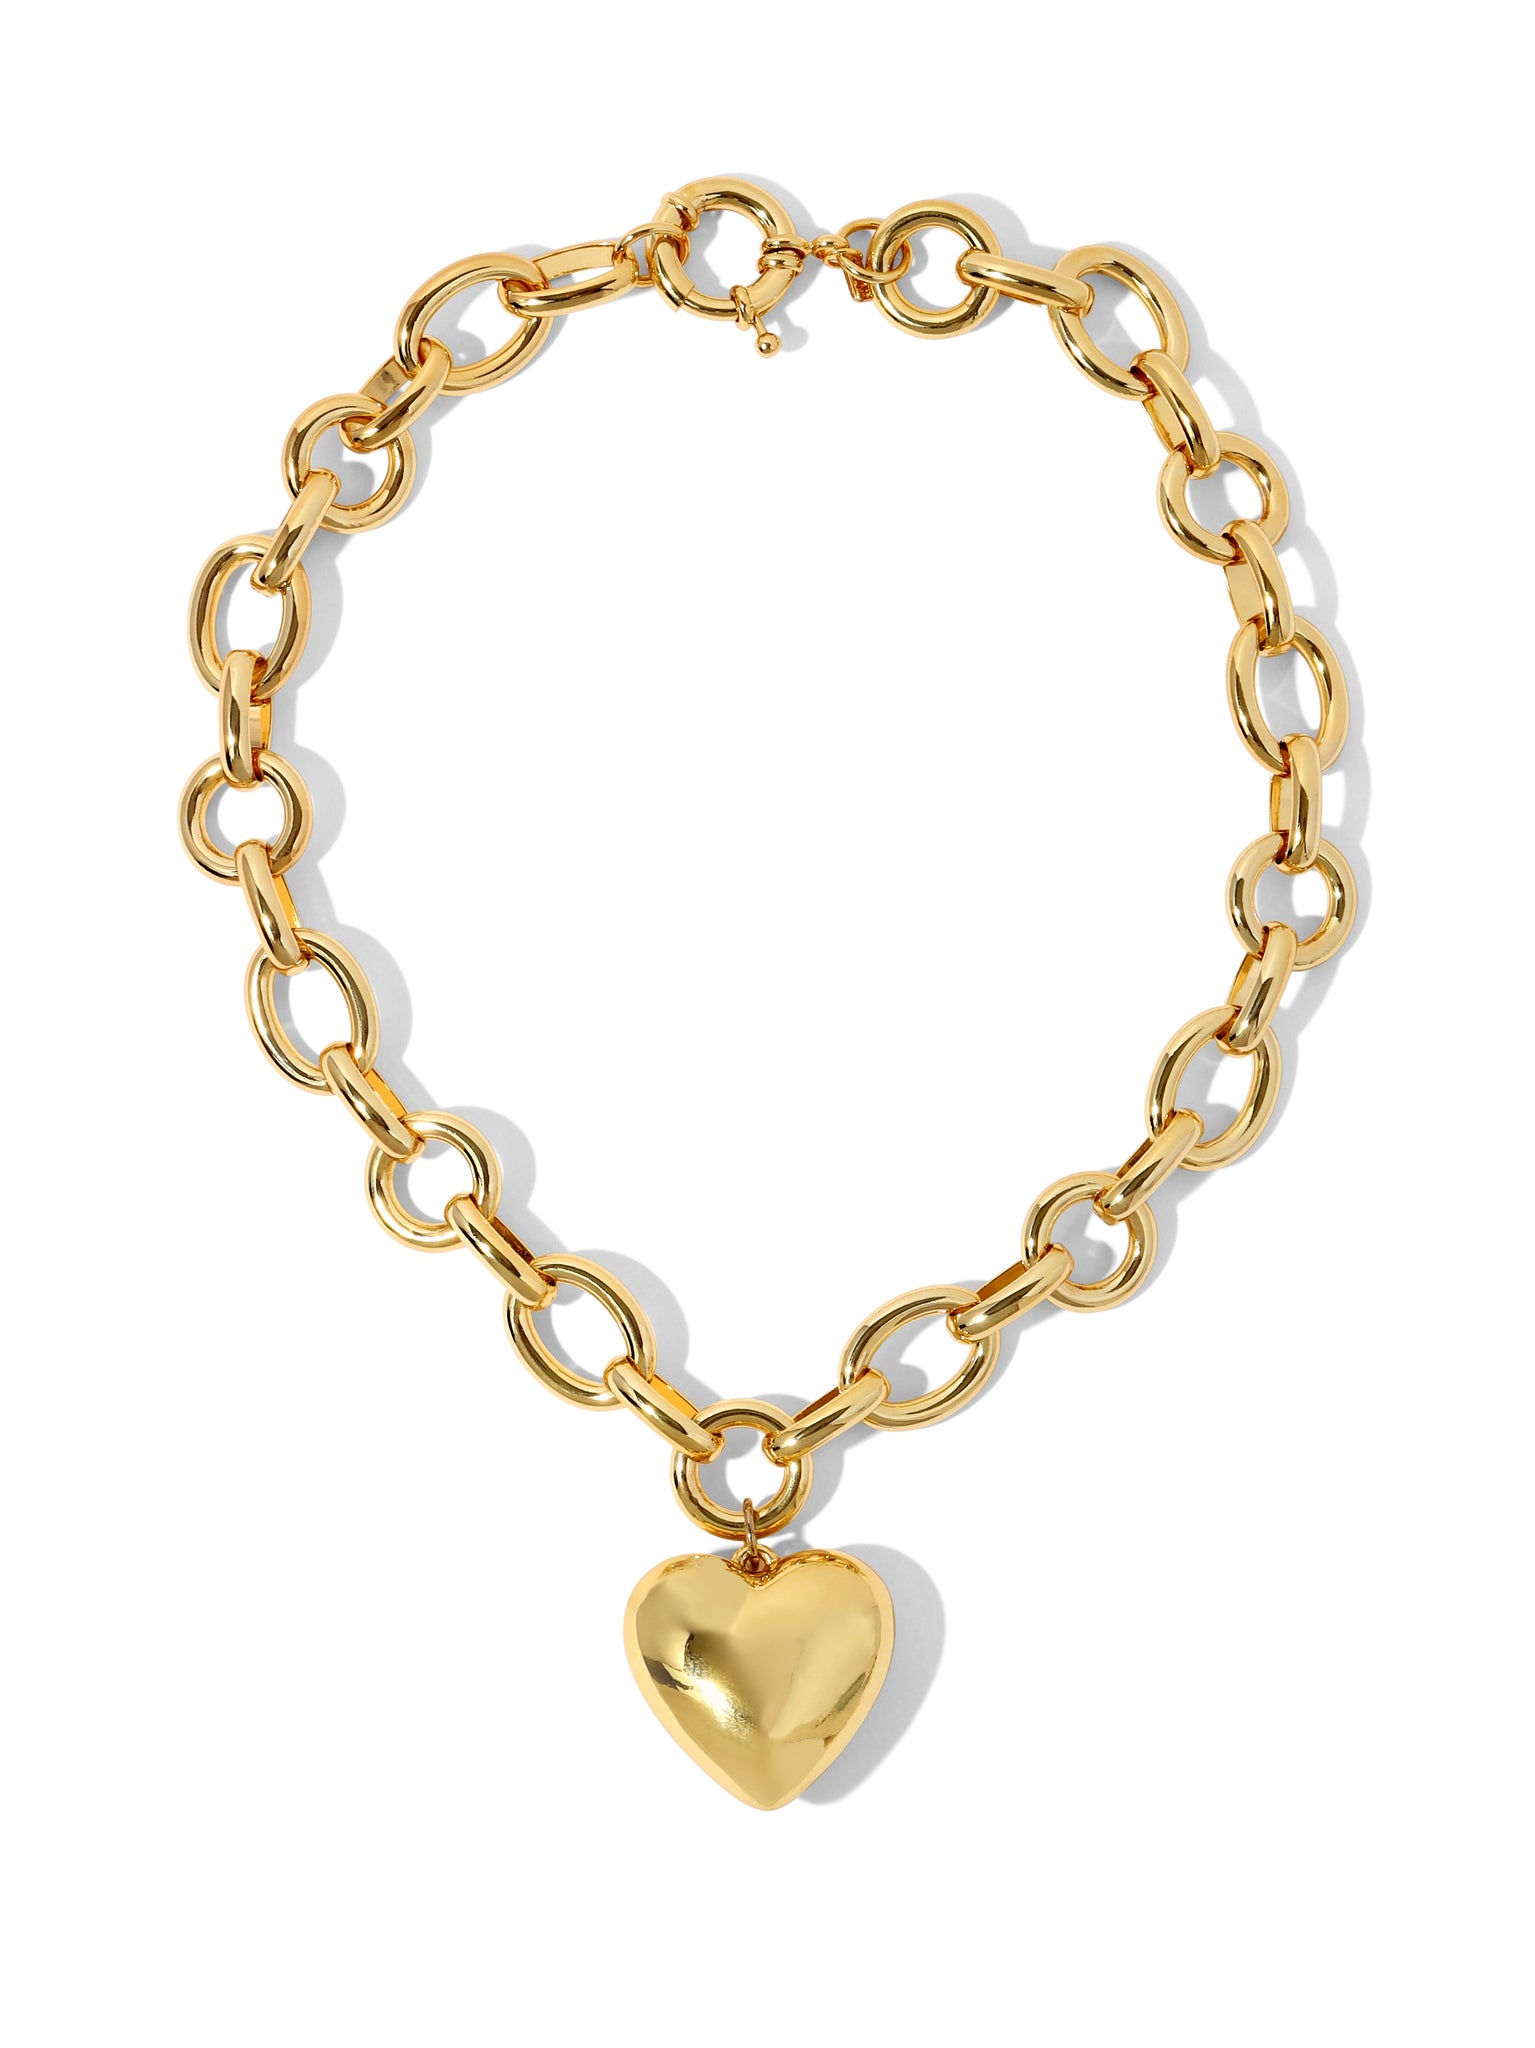 The Penelope Heart Necklace